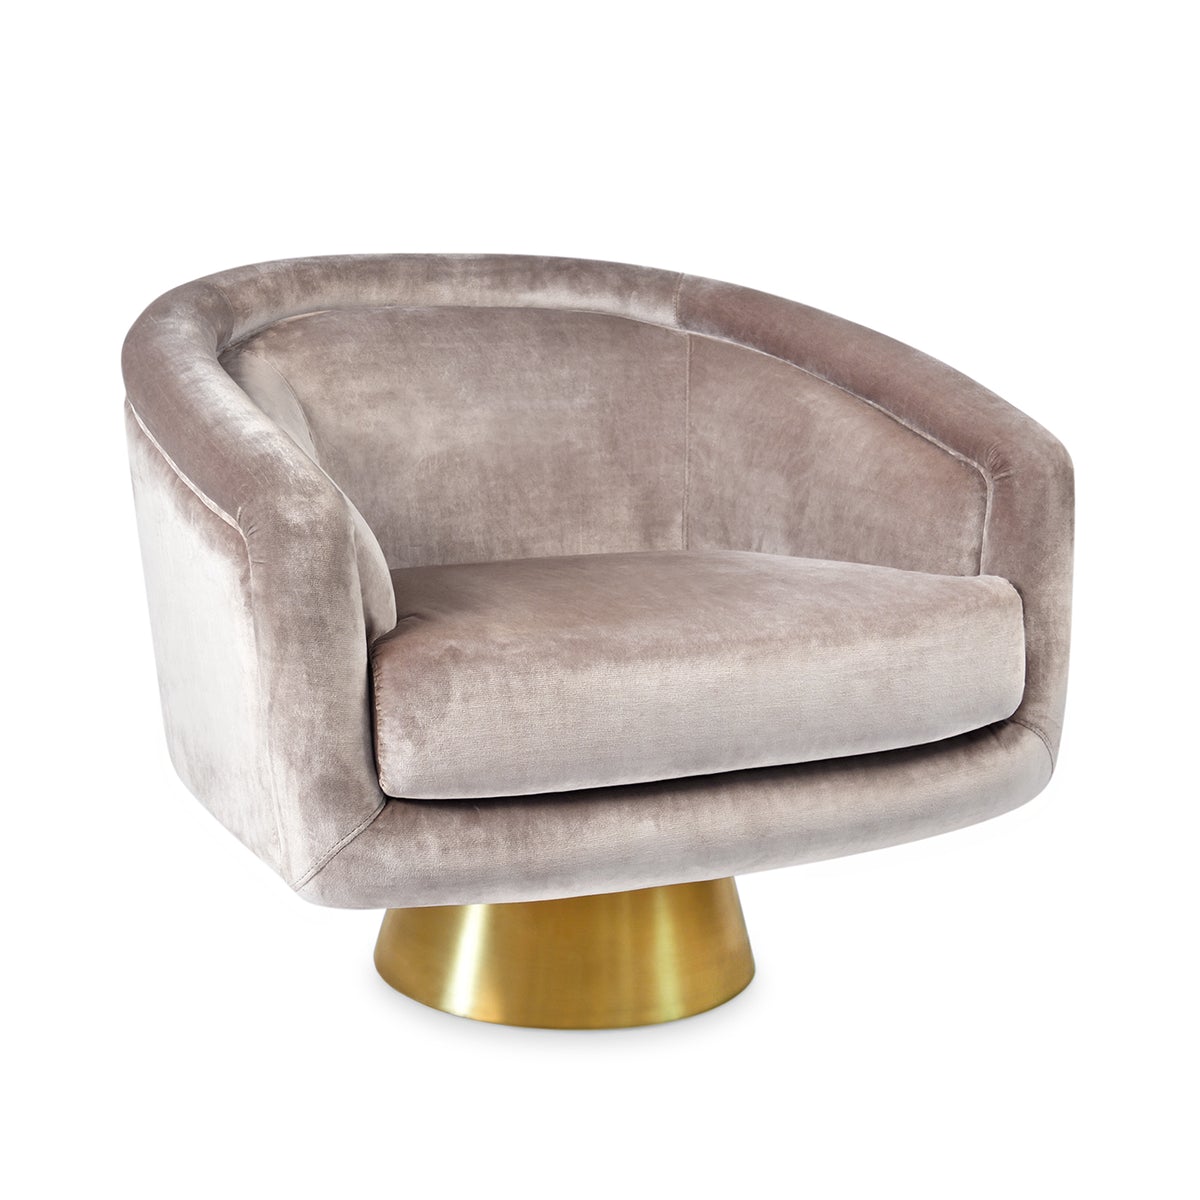 Load image into Gallery viewer, Bacharach Swivel Chair Como ChampagneLounge Chair Jonathan Adler  Como Champagne   Four Hands, Burke Decor, Mid Century Modern Furniture, Old Bones Furniture Company, Old Bones Co, Modern Mid Century, Designer Furniture, https://www.oldbonesco.com/
